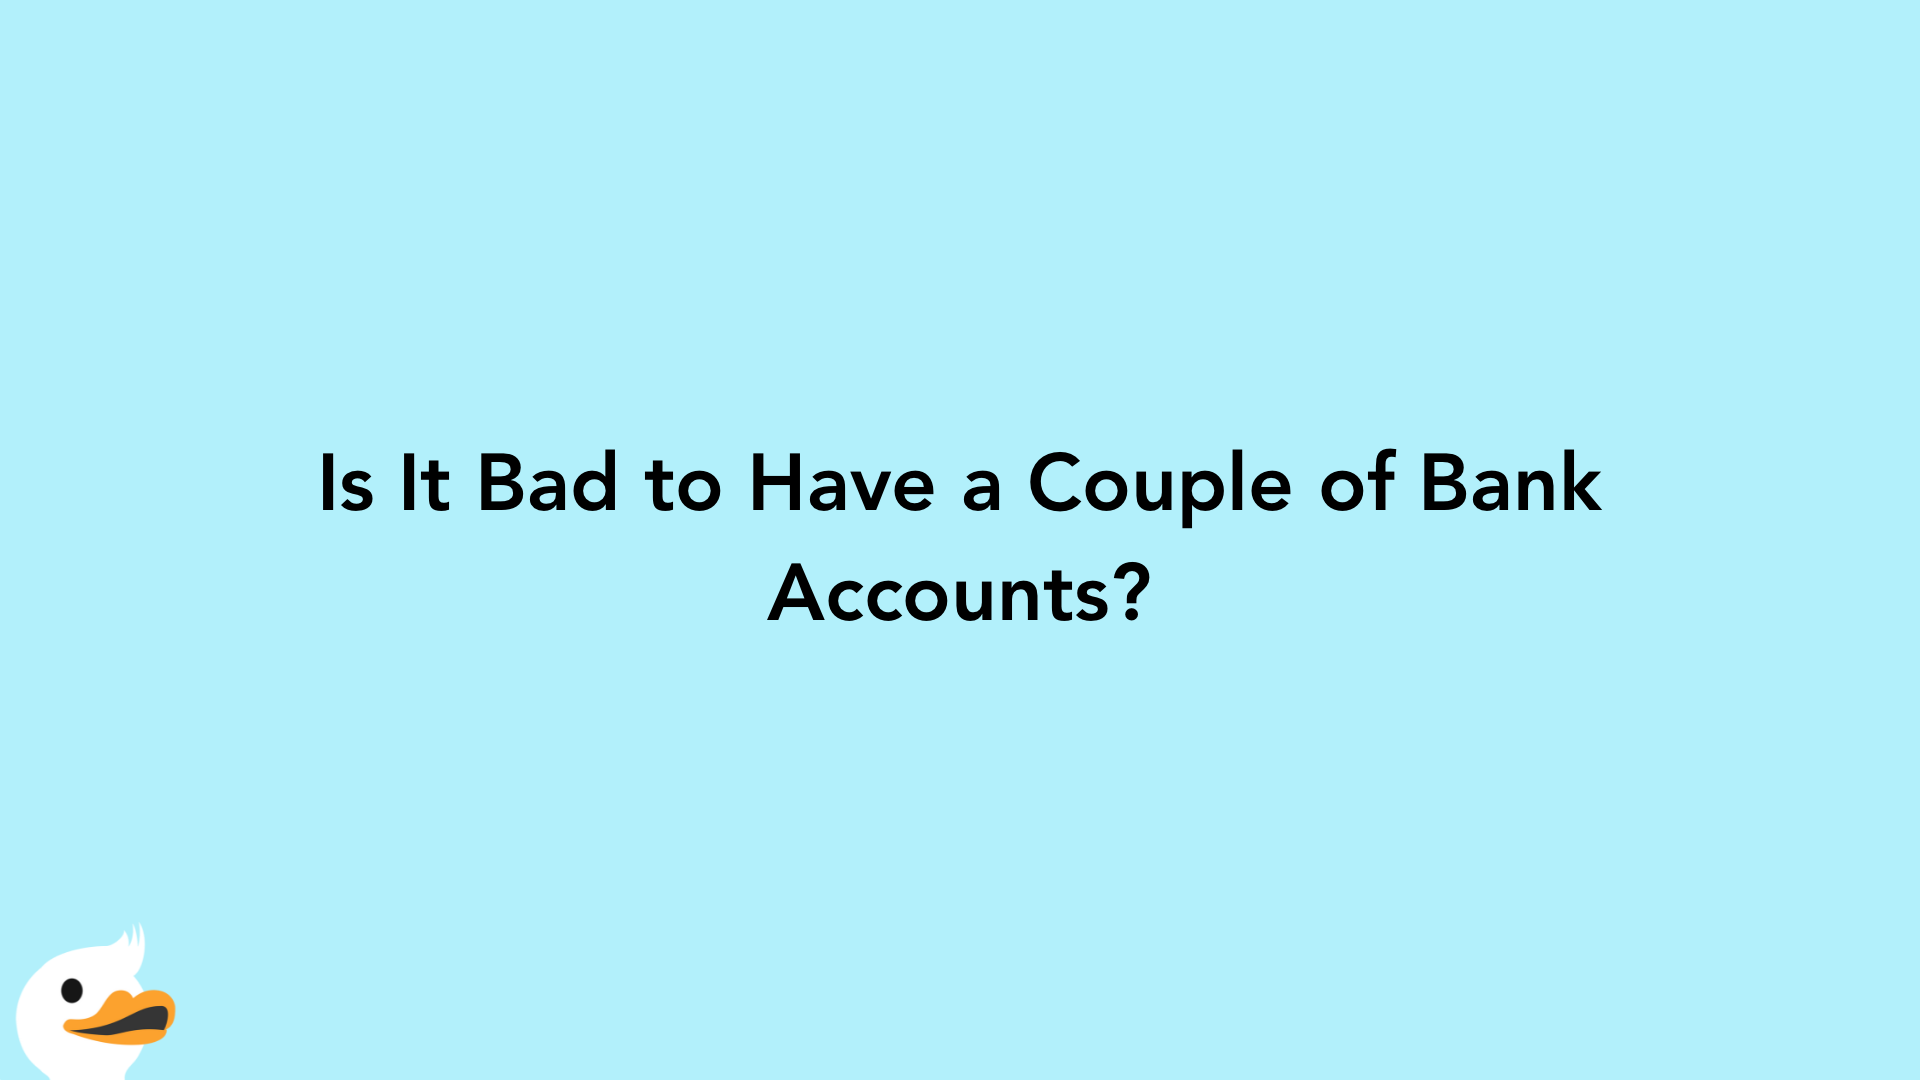 Is It Bad to Have a Couple of Bank Accounts?